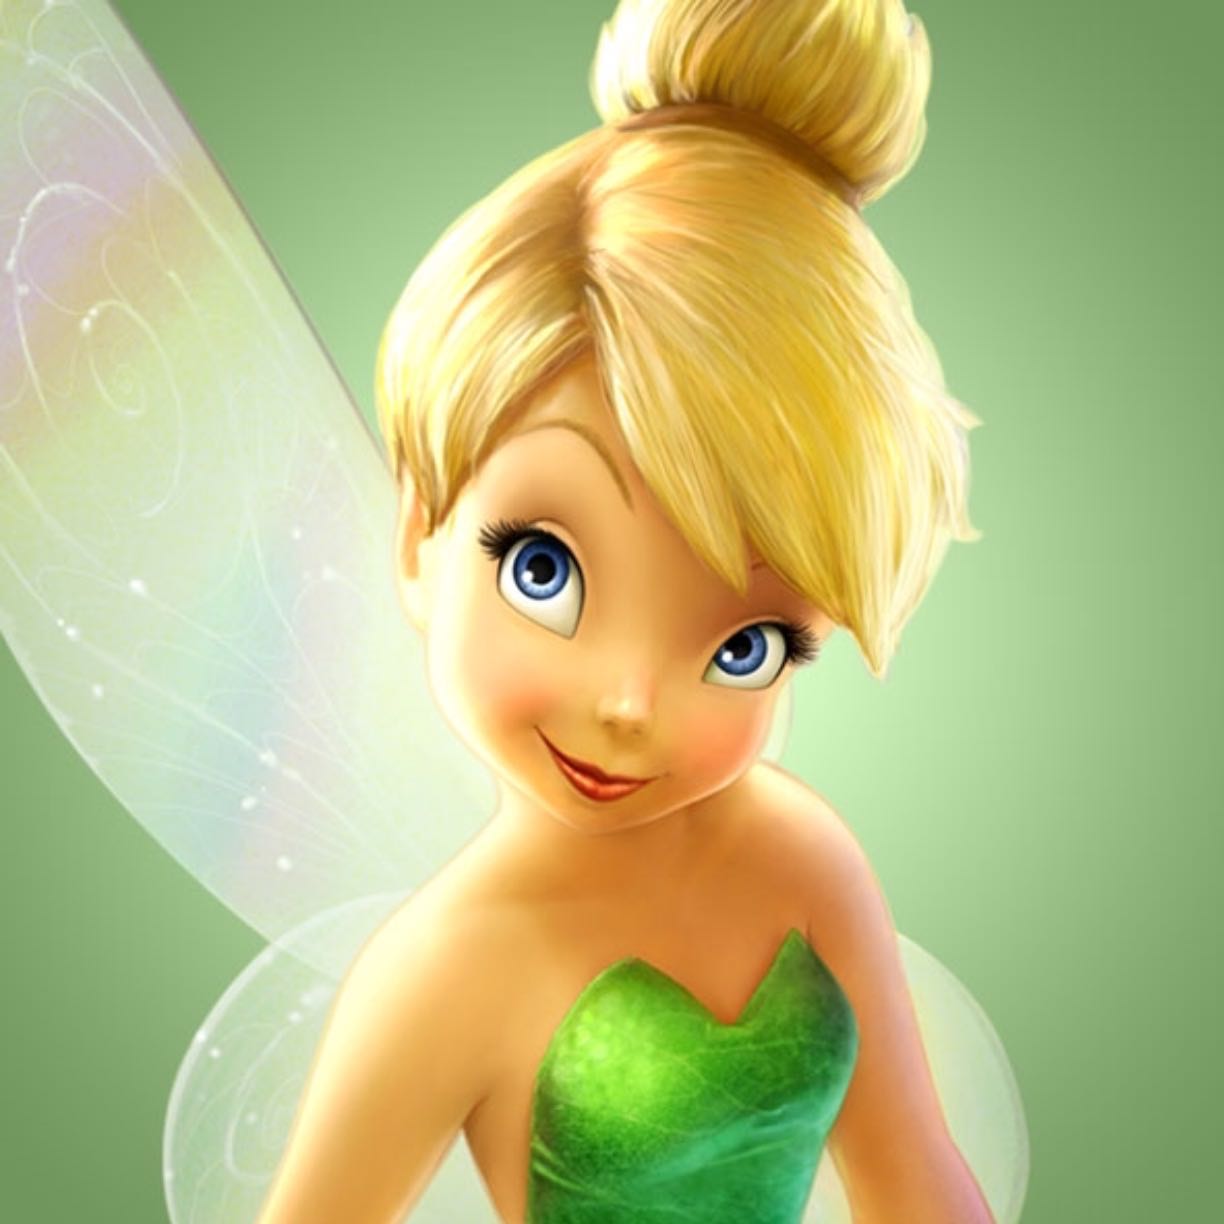 Tinker bell- house of lashes